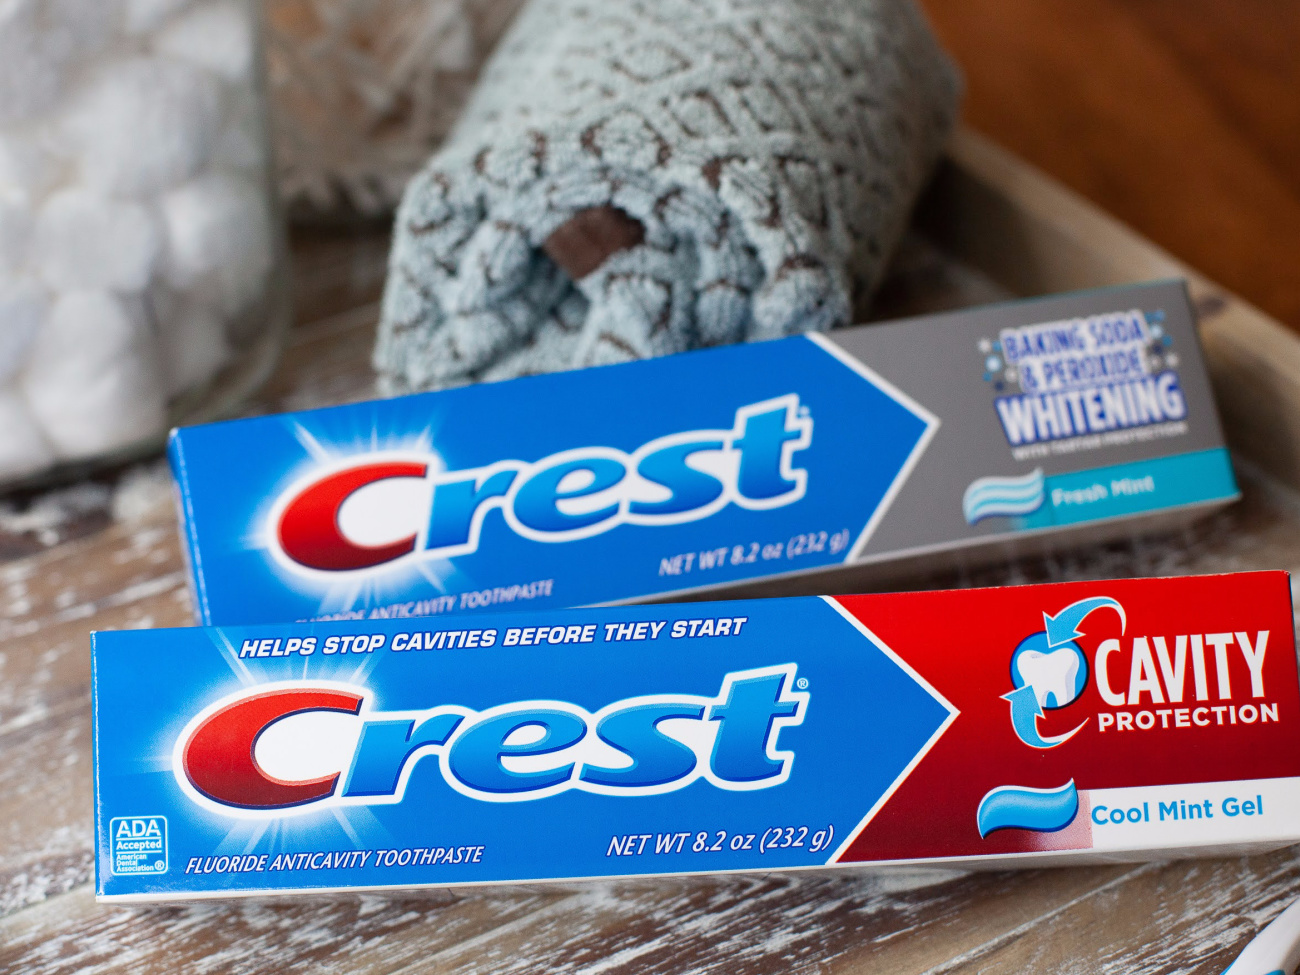 Don't Miss This BOGO Sale On Crest Toothpaste - Grab A Great Deal At Publix on I Heart Publix